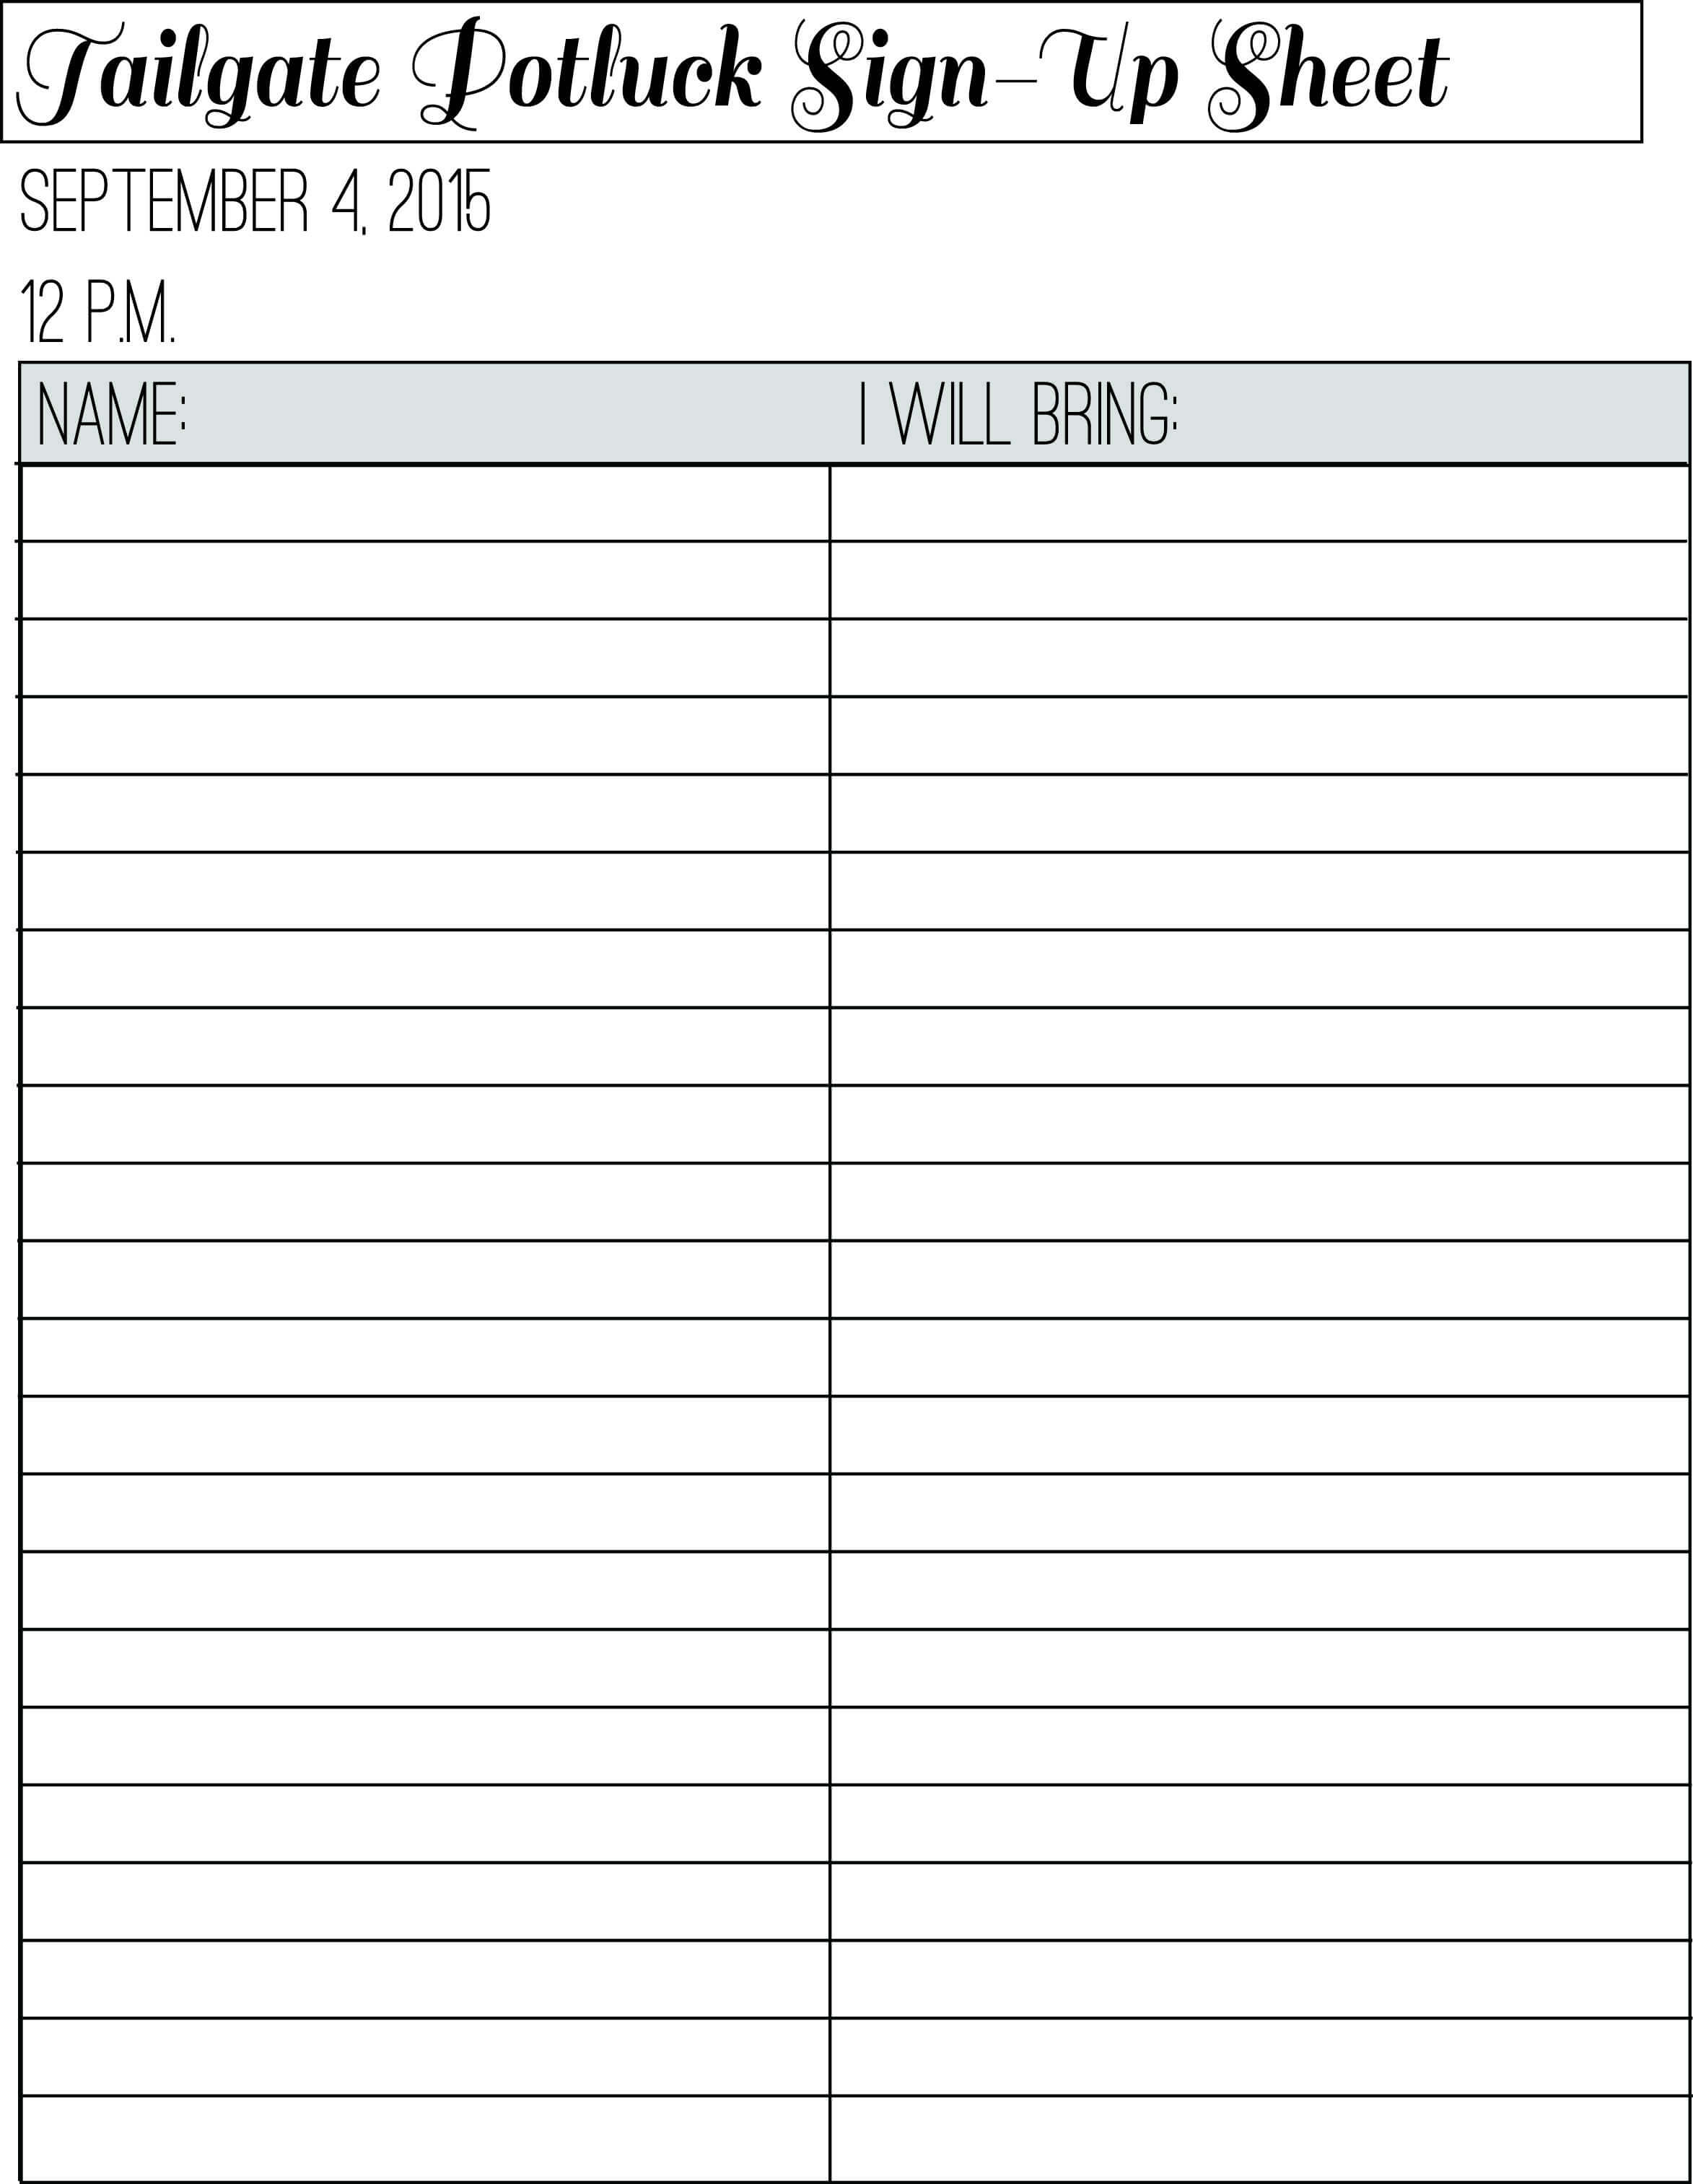 The Sign Up Sheet For Our Tailgate Potluck. | Cri Office Fun With Potluck Signup Sheet Template Word